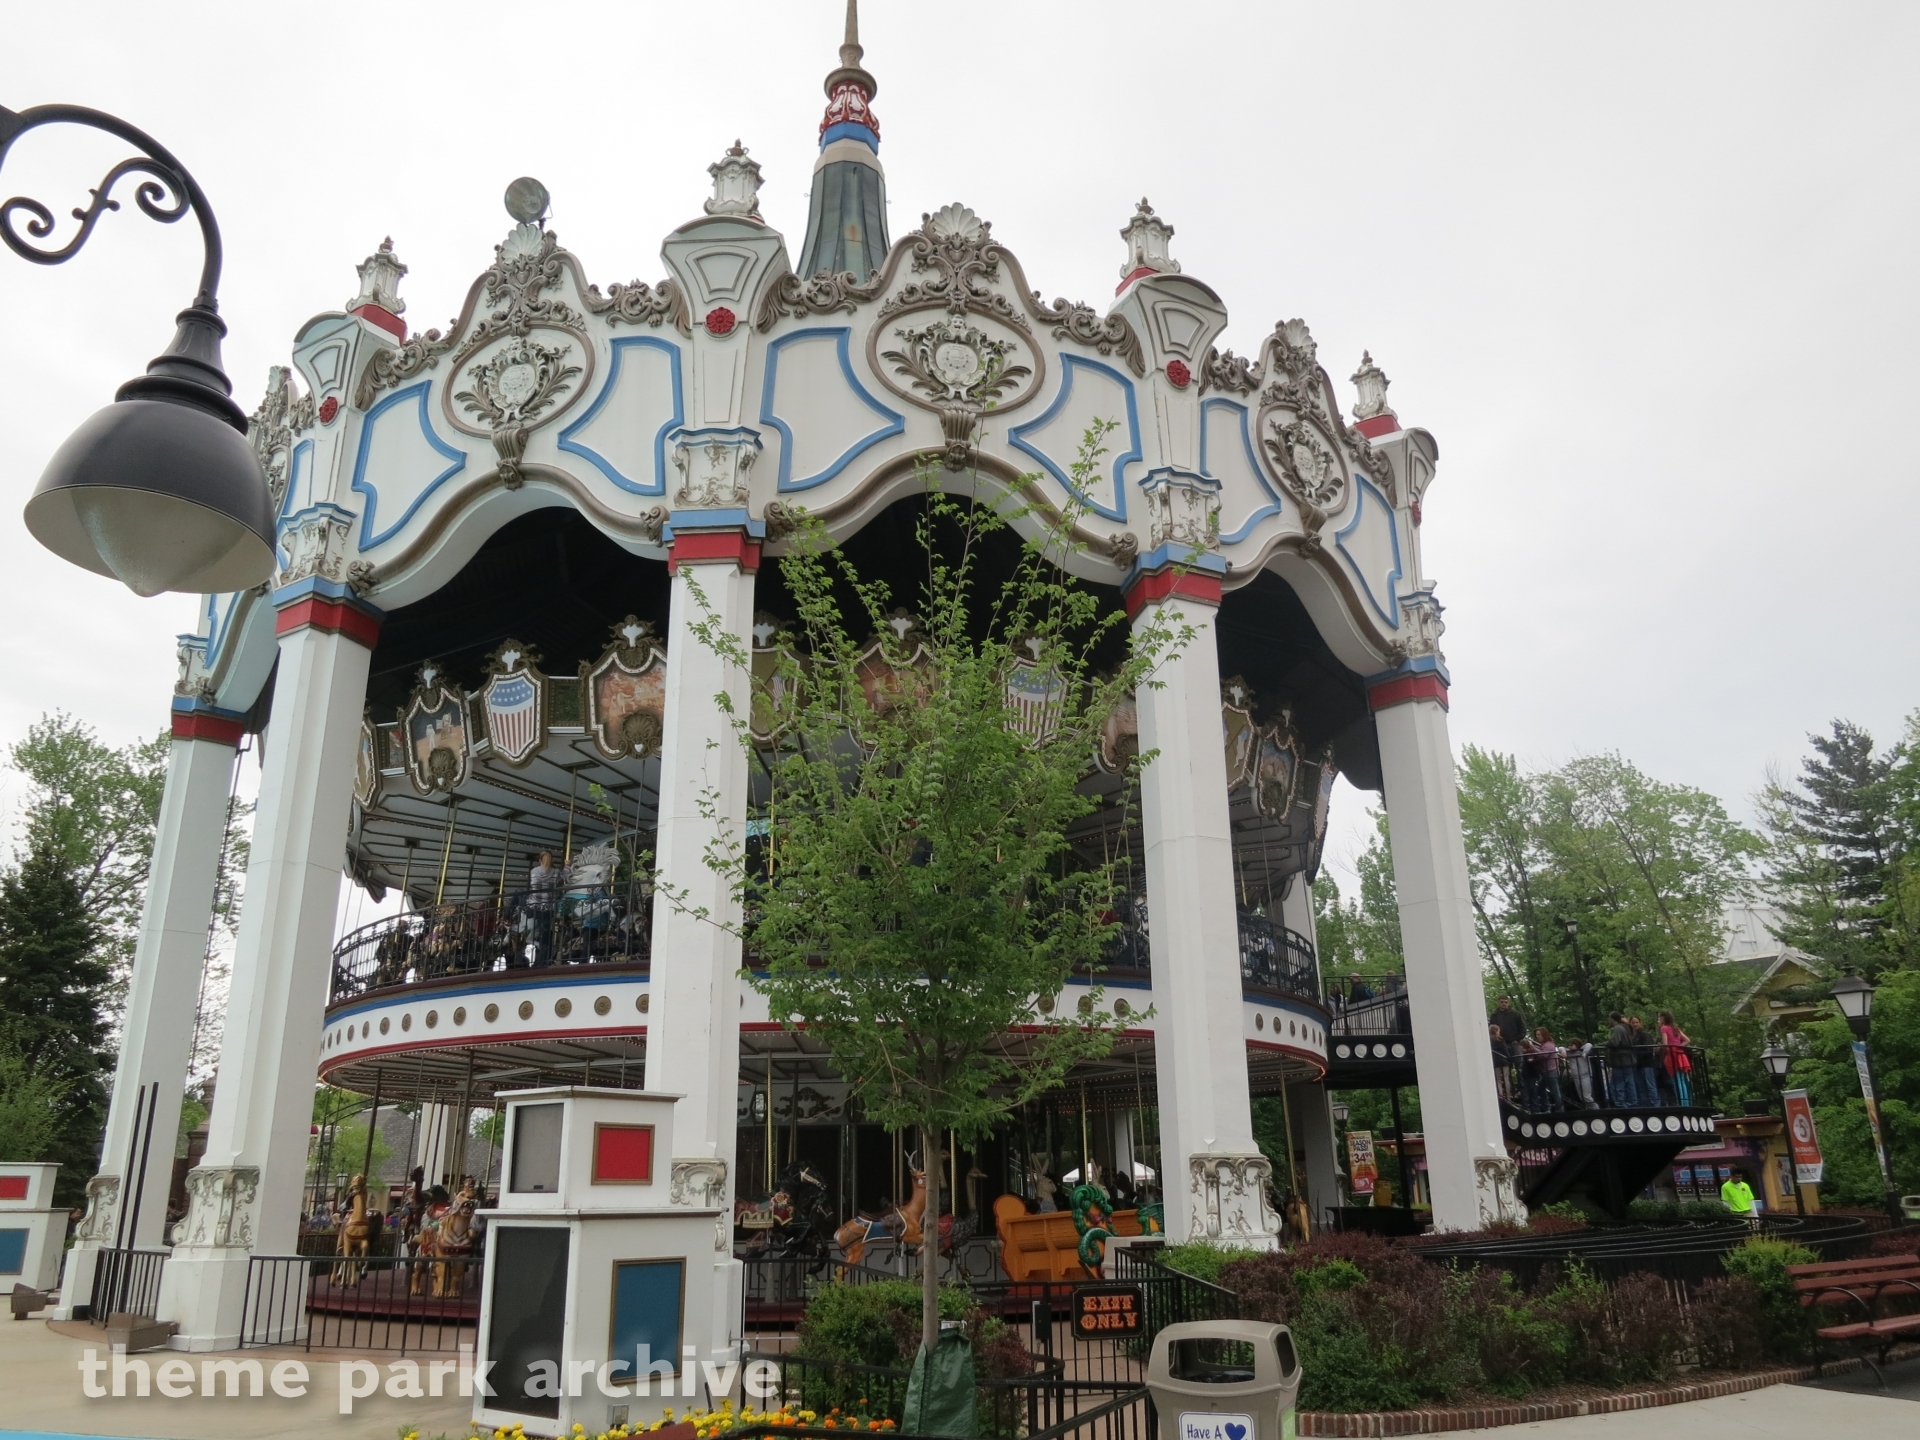 Columbia Carousel at Six Flags Great America